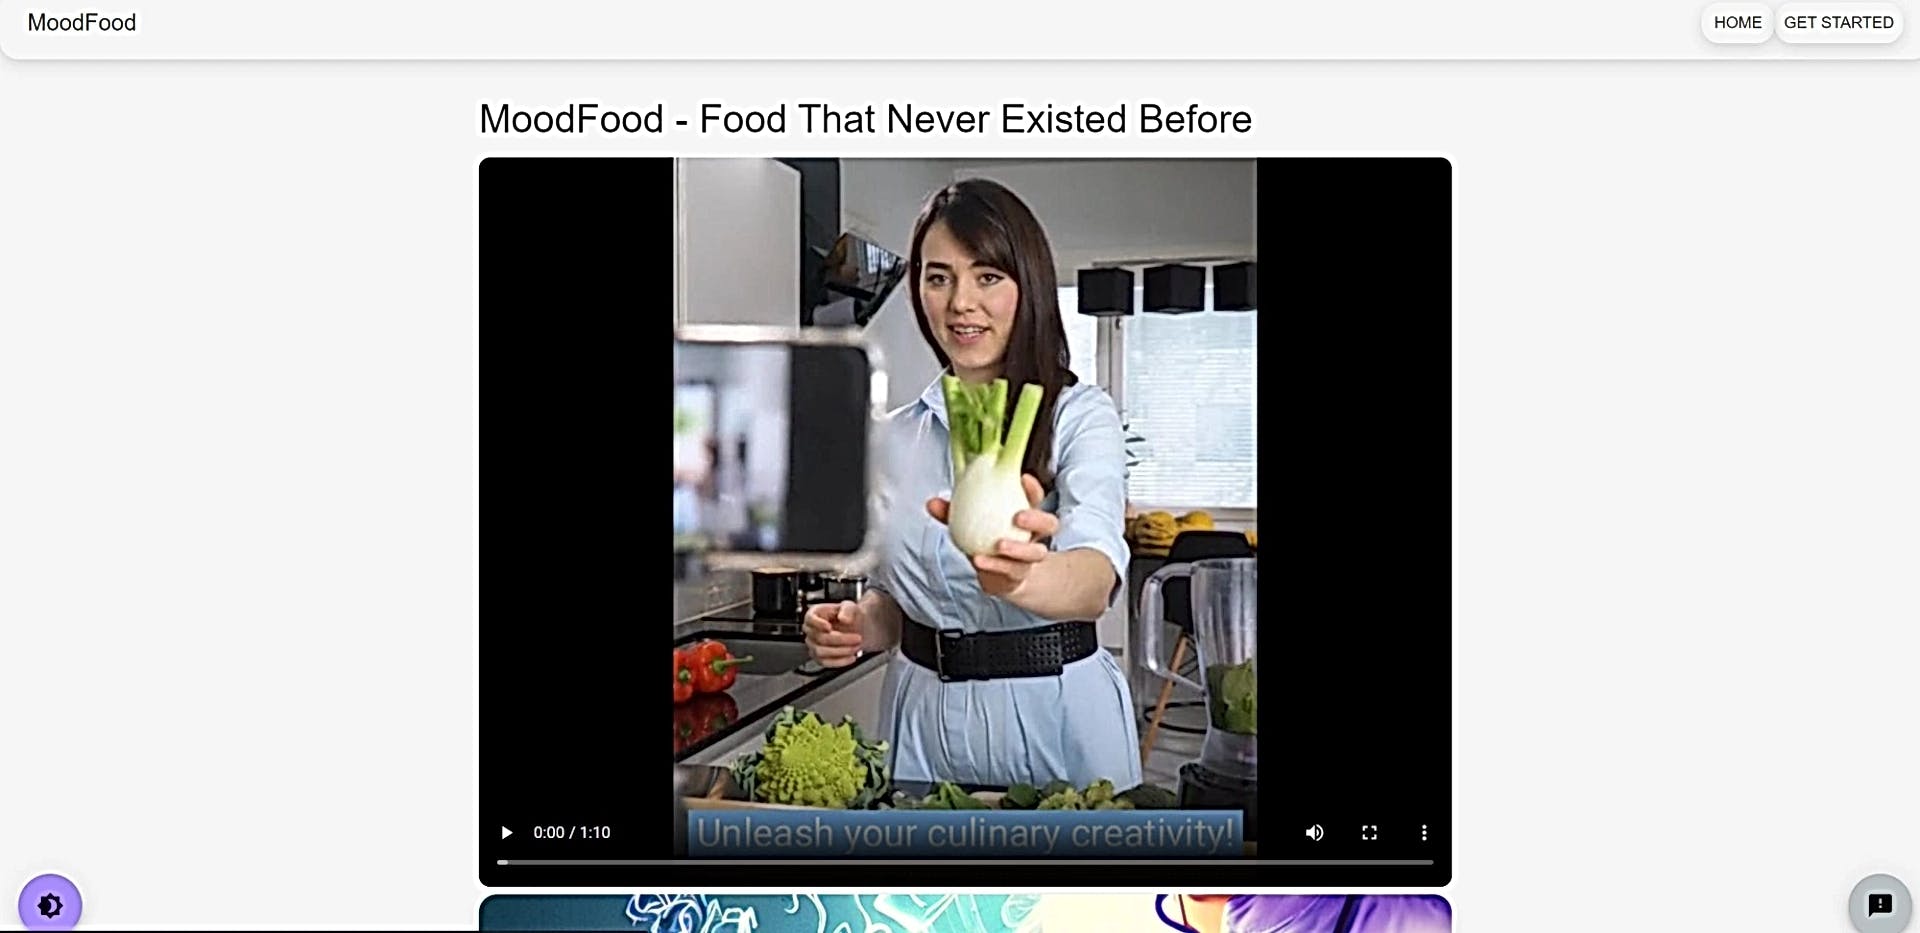 MoodFood featured